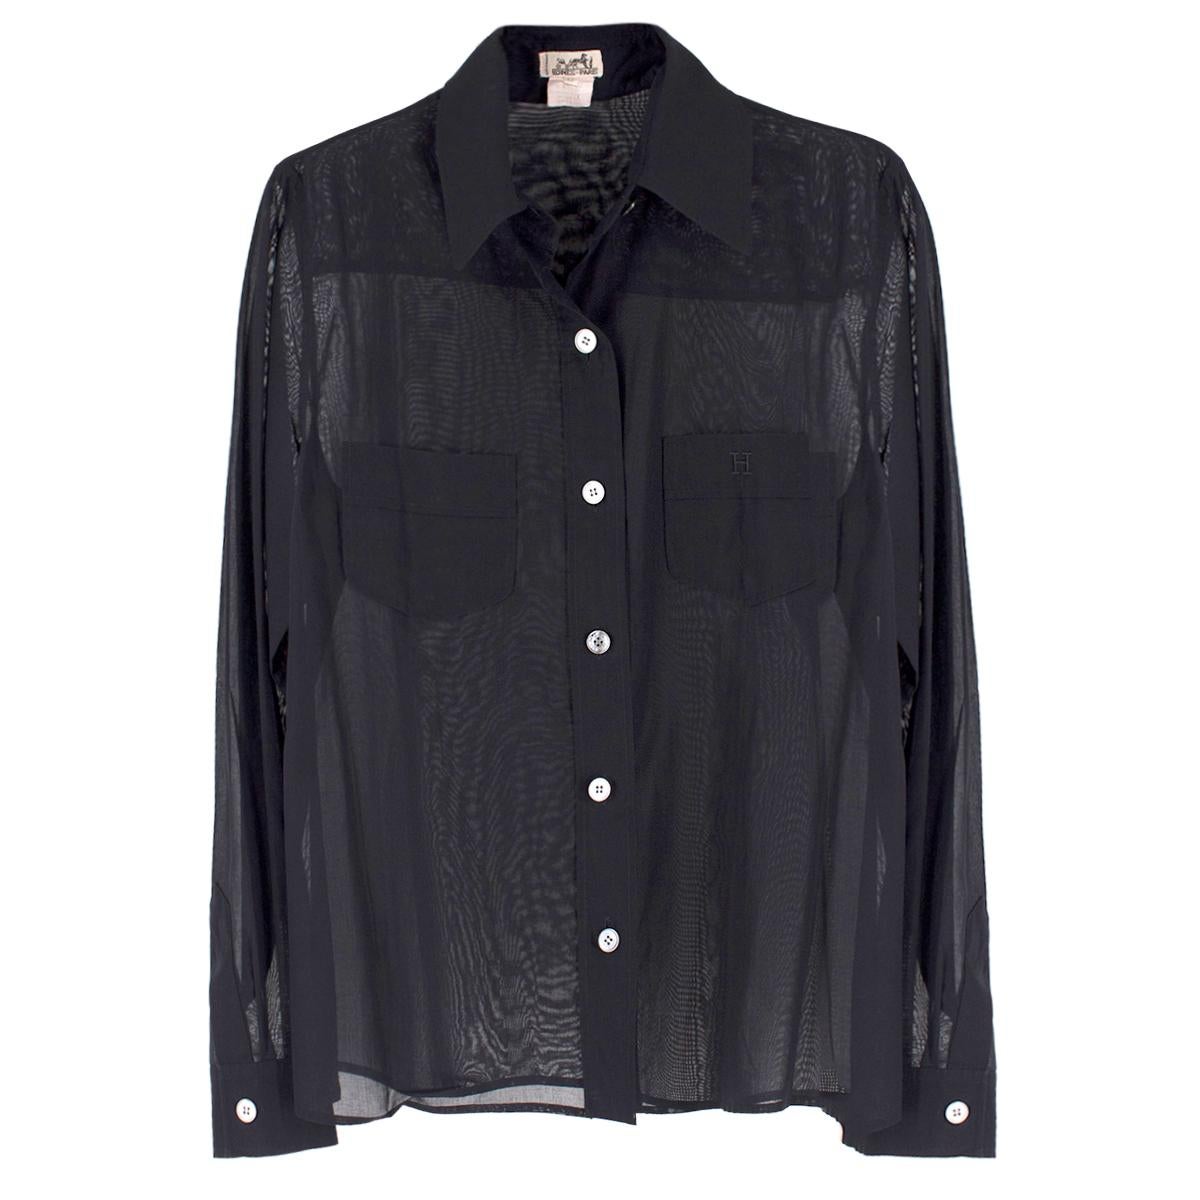 Hermes Black Sheer Classic Shirt

- Black, cotton, sheer
- Buttoned fastening closure at front and cuffs
- Point collar
- Two chest pockets, right pocket has signature logo print
- Long sleeves
-100% cotton

Please note, these items are pre-owned